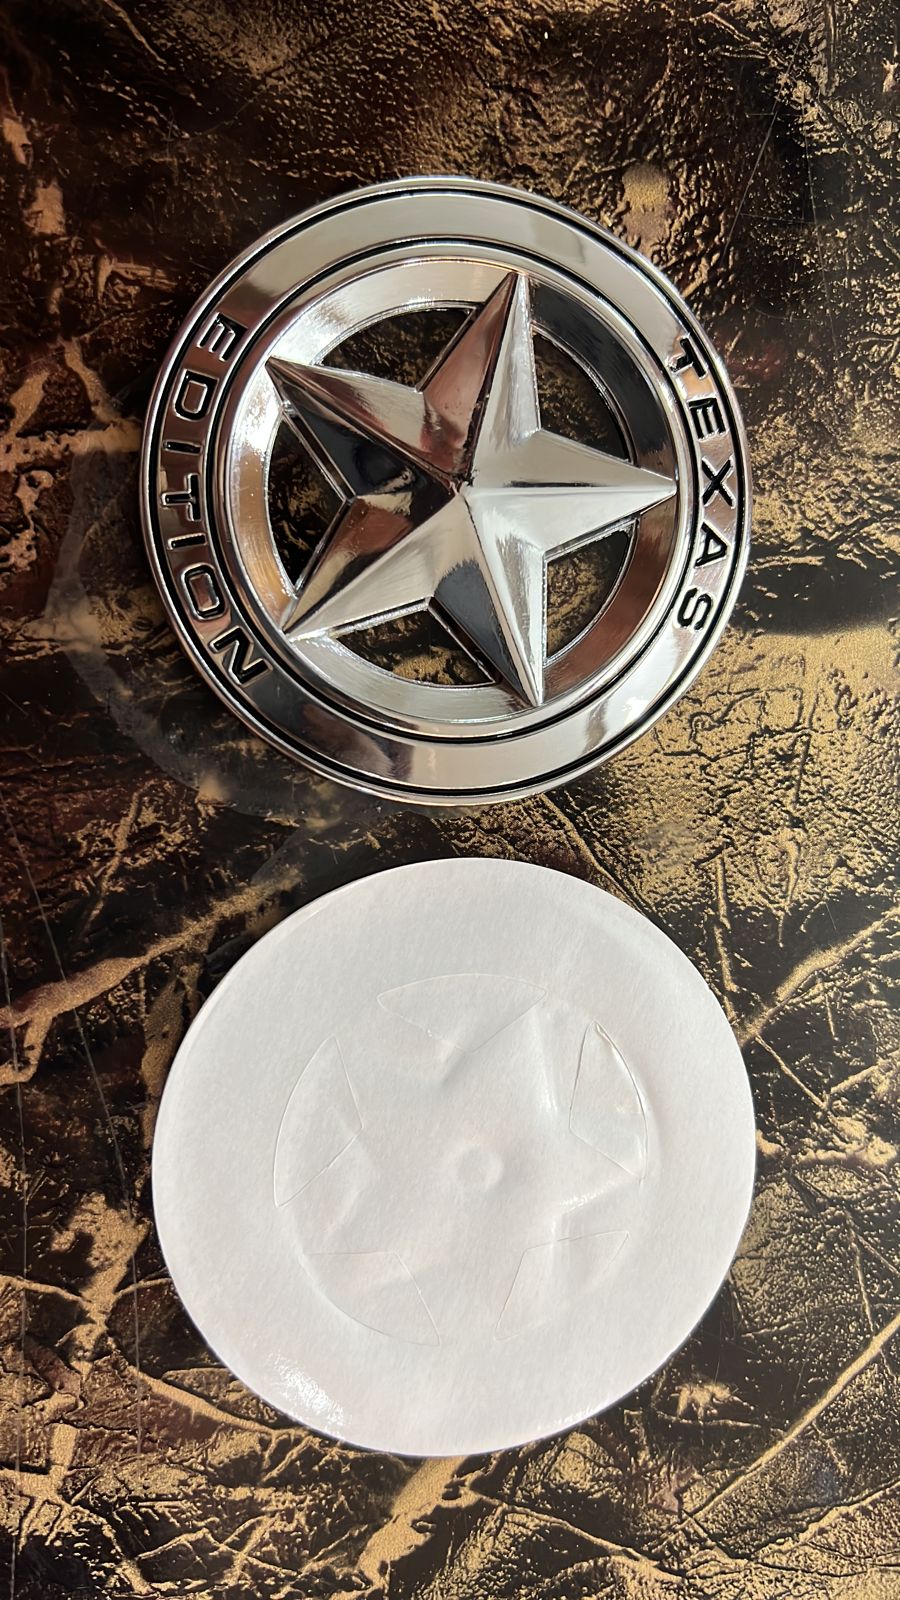 Star Texas Edition Emblem Sticker for All Cars, Metal (Silver)